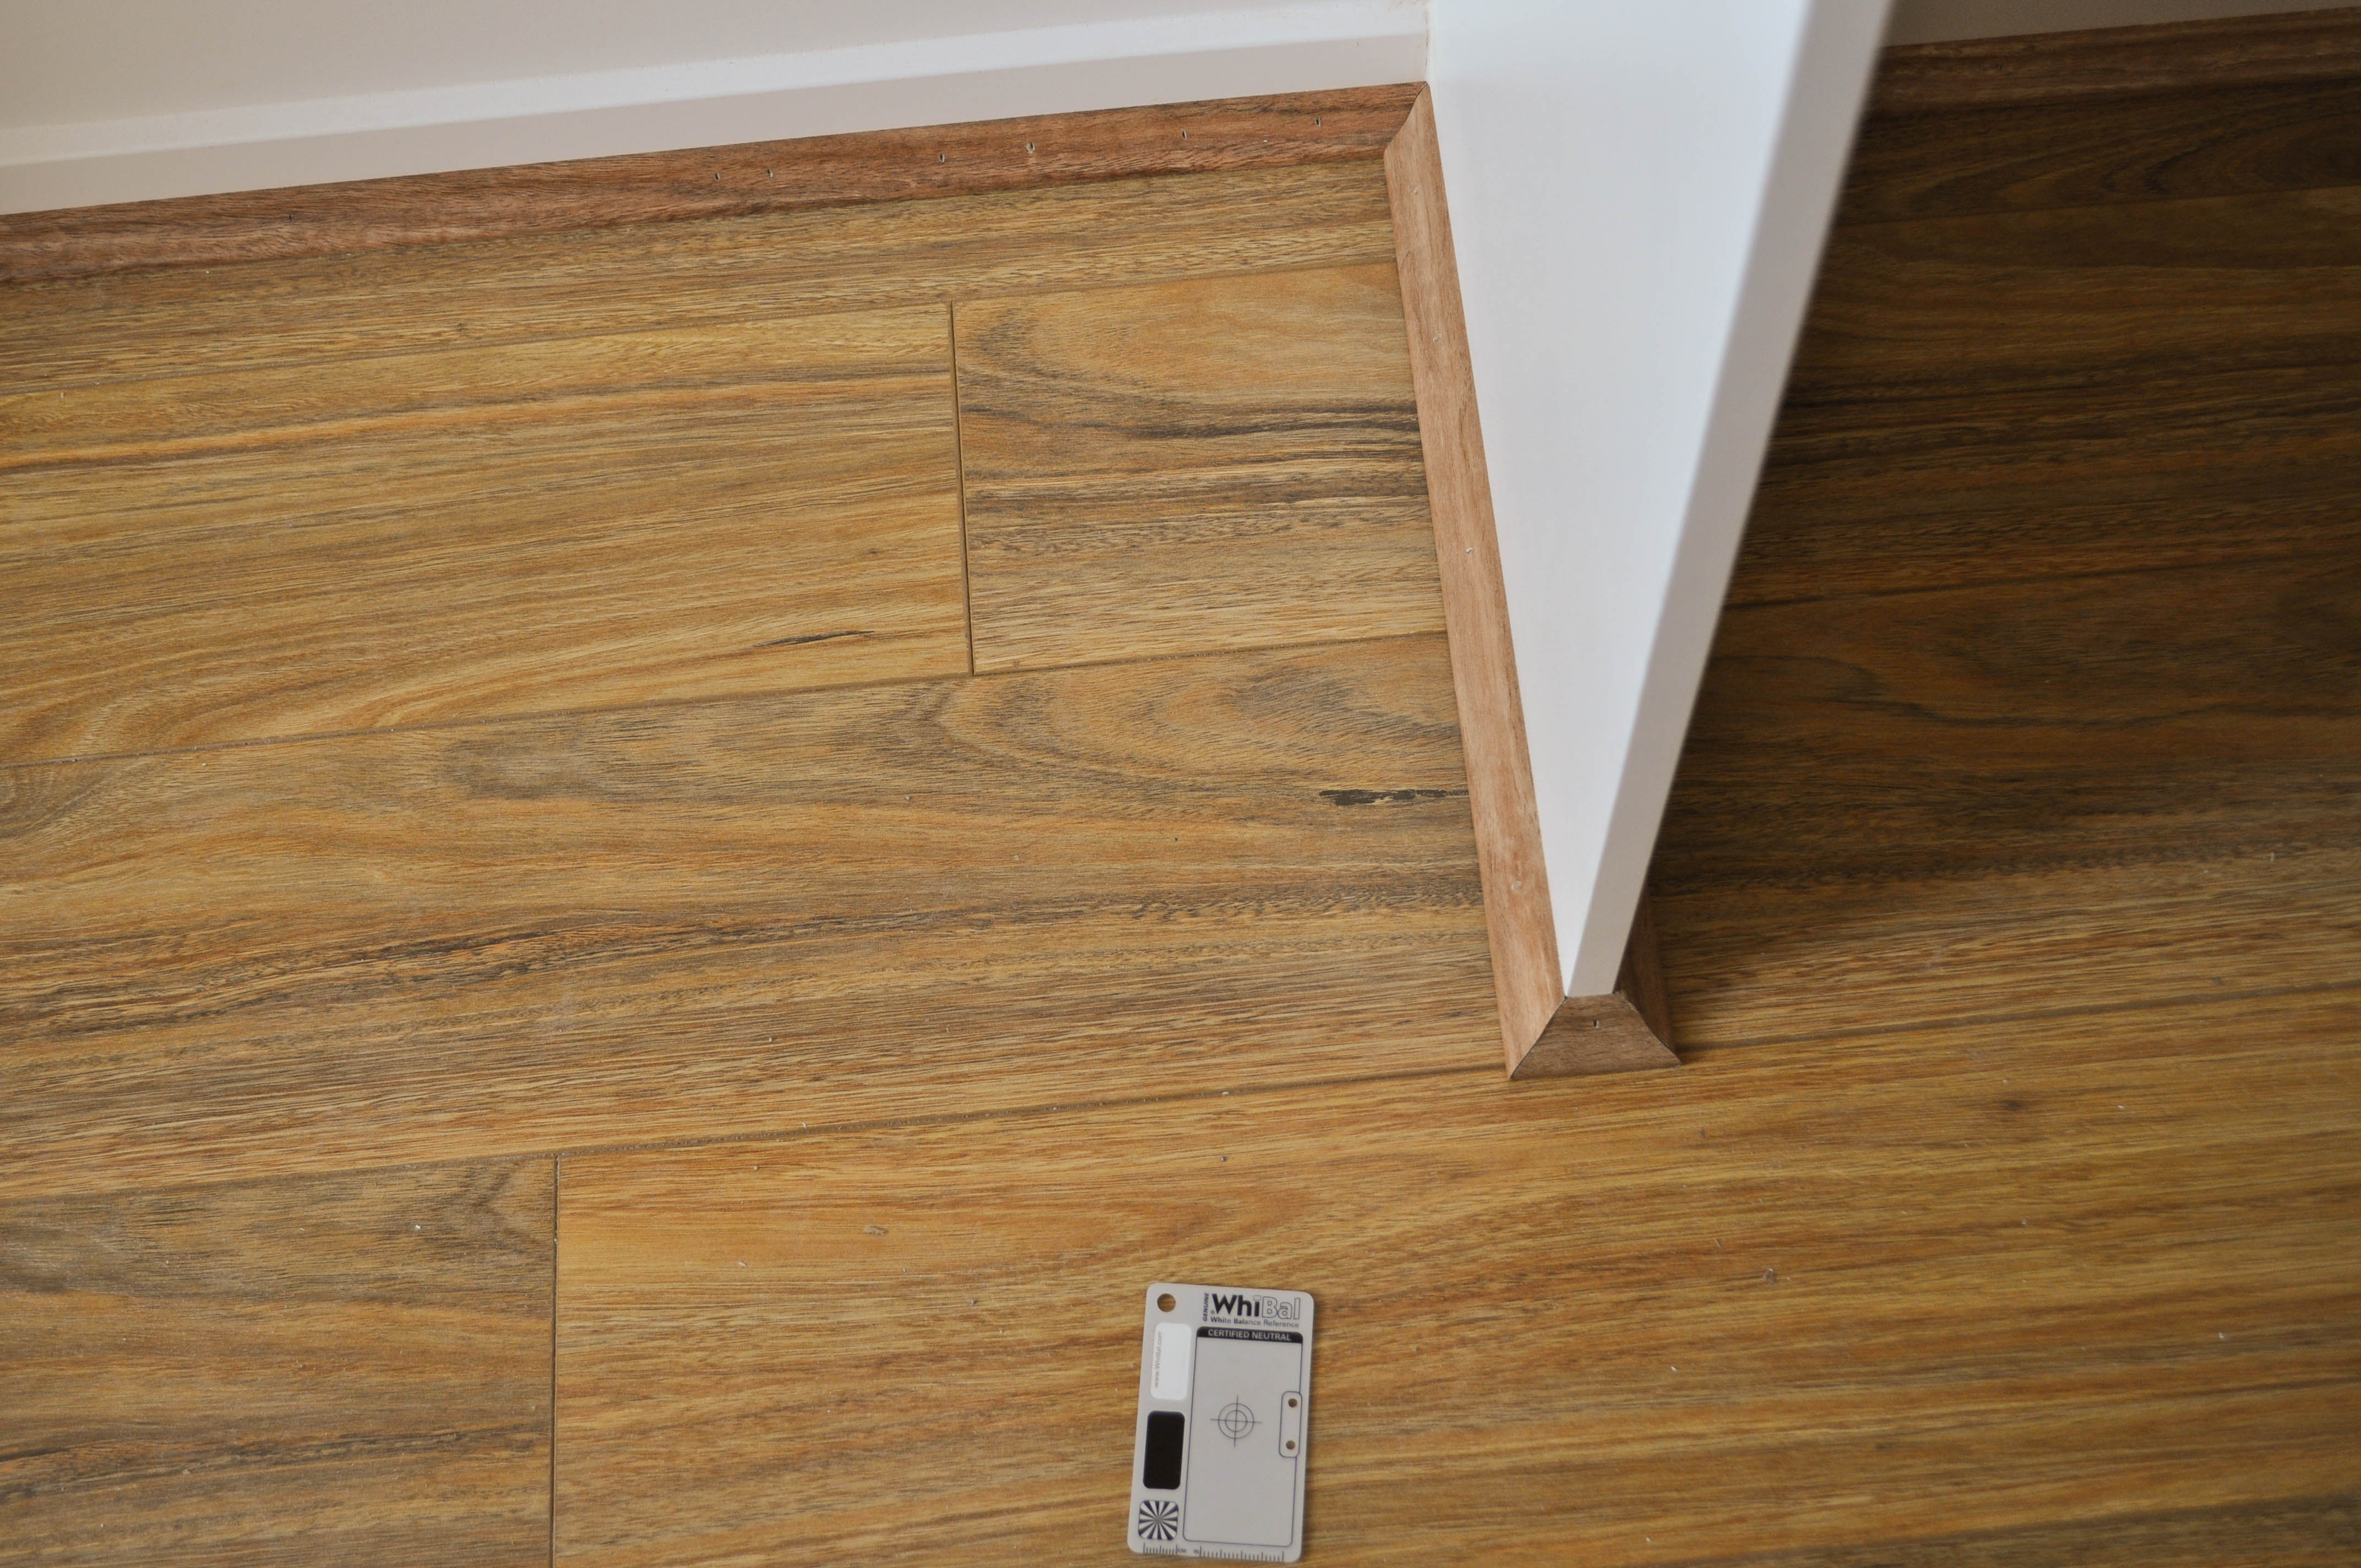 showing a walkin wardrobe floor where 12mm thick Spotted Gum,laminate floorboard flooring, having been installed in a wardrobe 
 and having the scotia that covers the expansion gap, fitted that has been cut to size and mitred at its ends. The picture shows how to mitre the ends for an elegant finish and how to 
 cover the 10mm expansion gap between the perimeter boundary of the aggregate floor and the perimter of the walls and fixed objects around which the floor boards need to go around. 
 The scotia has been fully nailed into place procing a very elgant and pleasing finish. The robe is in a home in Point Cook, Werribee Vic 3030. The installation was done by Concord
 Floors and the floor boards were supplied by Concord Floors.This is information as to how to install laminate flooring for the do it yourself floor board laminate flooring installer
 in the section on how to install the scotia that covers the 10mm expansion gap.